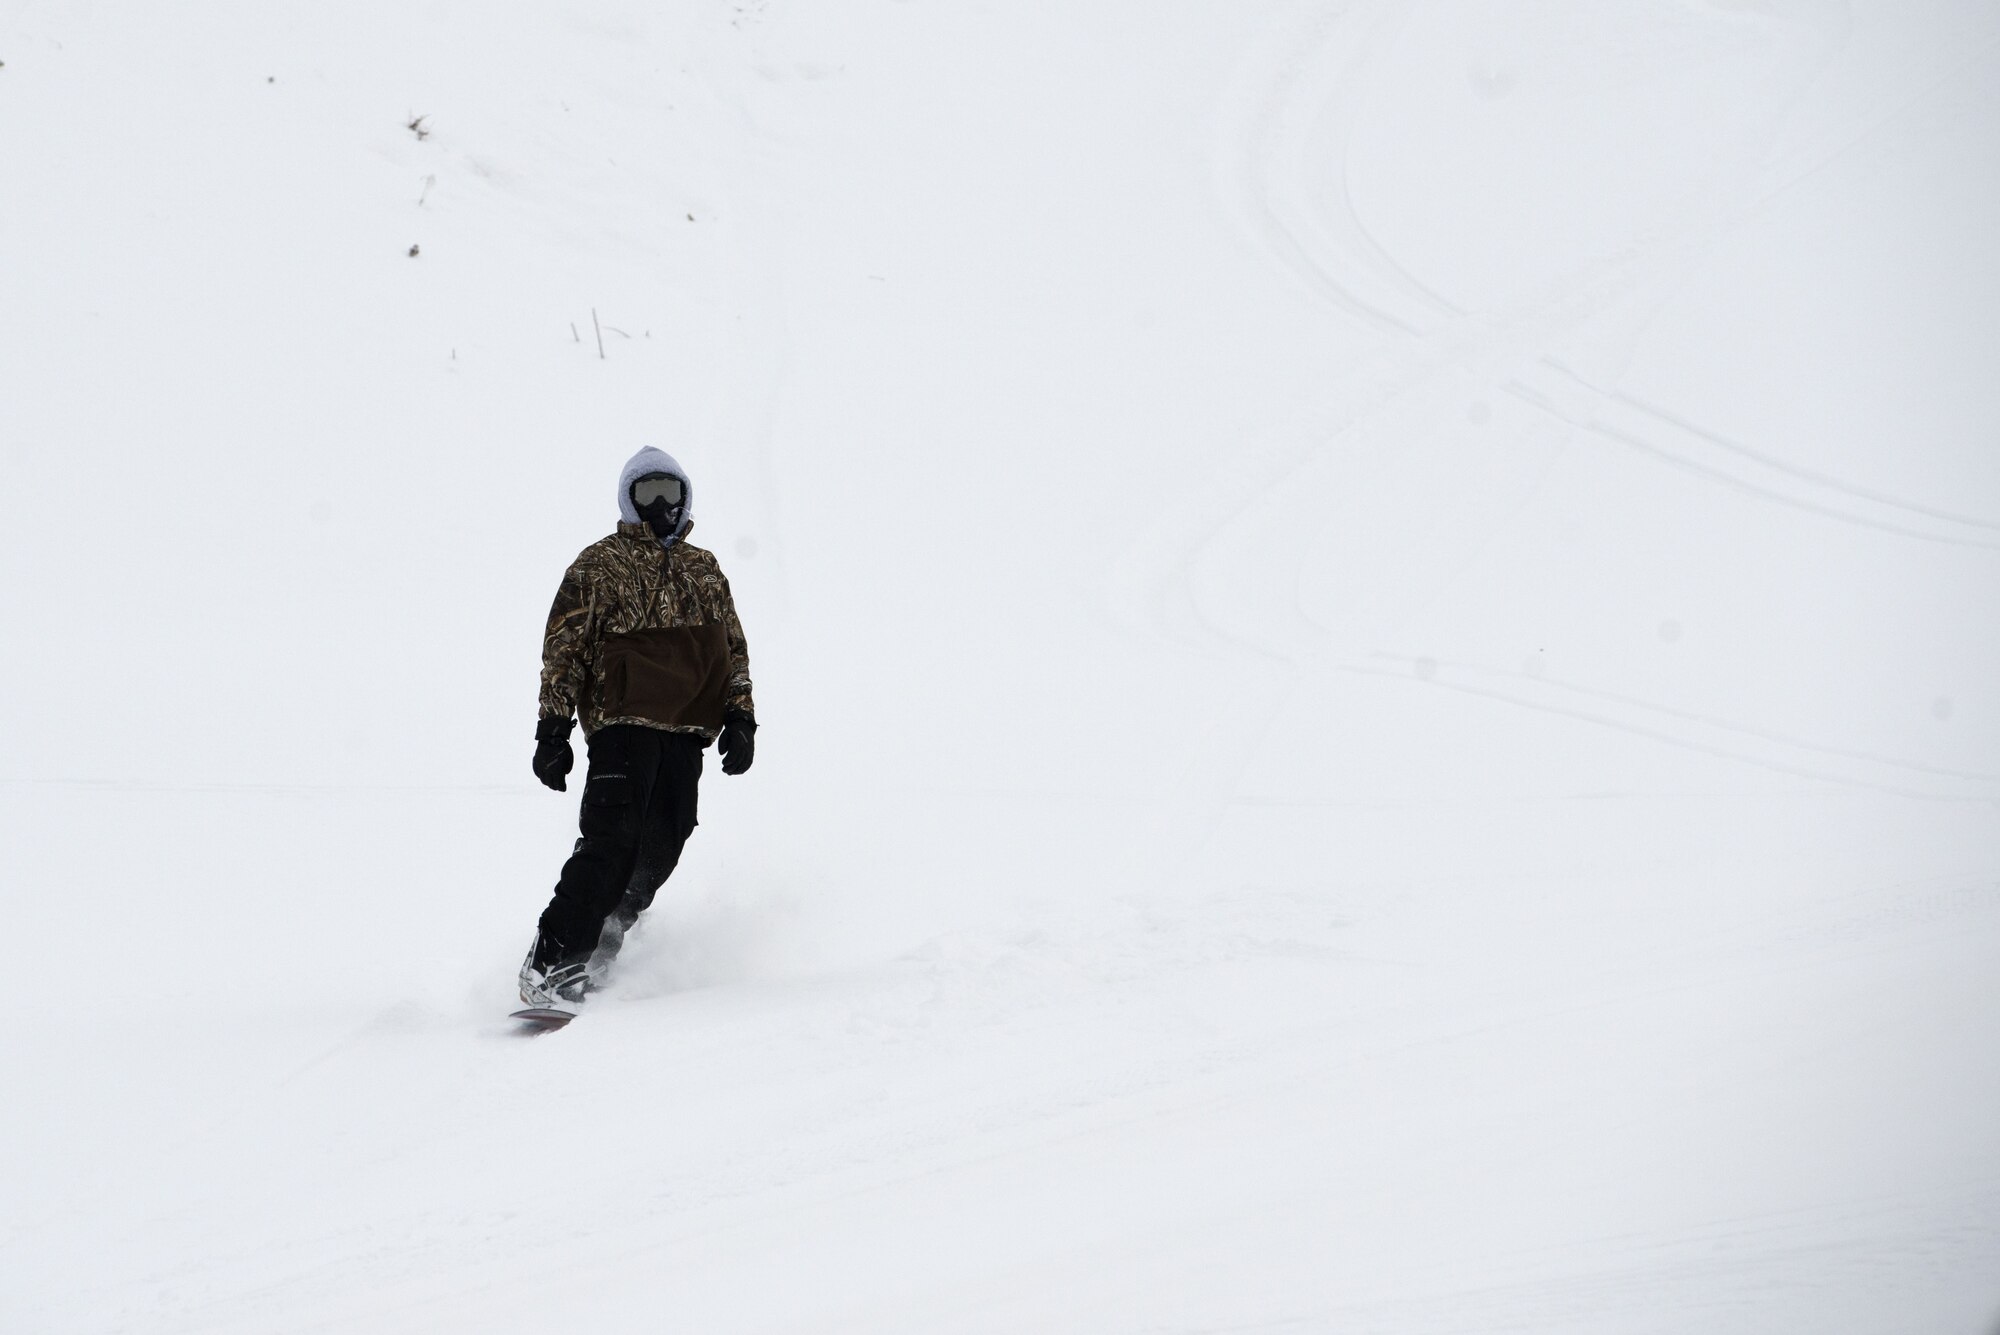 Airman 1st Class Zachary Rayfield, 673d Civil Engineer Squadron fire fighter, snowboards down Hillberg Ski Area during Winterfest at Joint Base Elmendorf-Richardson, Alaska, Dec. 21, 2017. Winterfest was a winter solstice celebration hosted by Hillberg for anyone with base access and offered a plethora of events from noon to as late at 8 p.m.